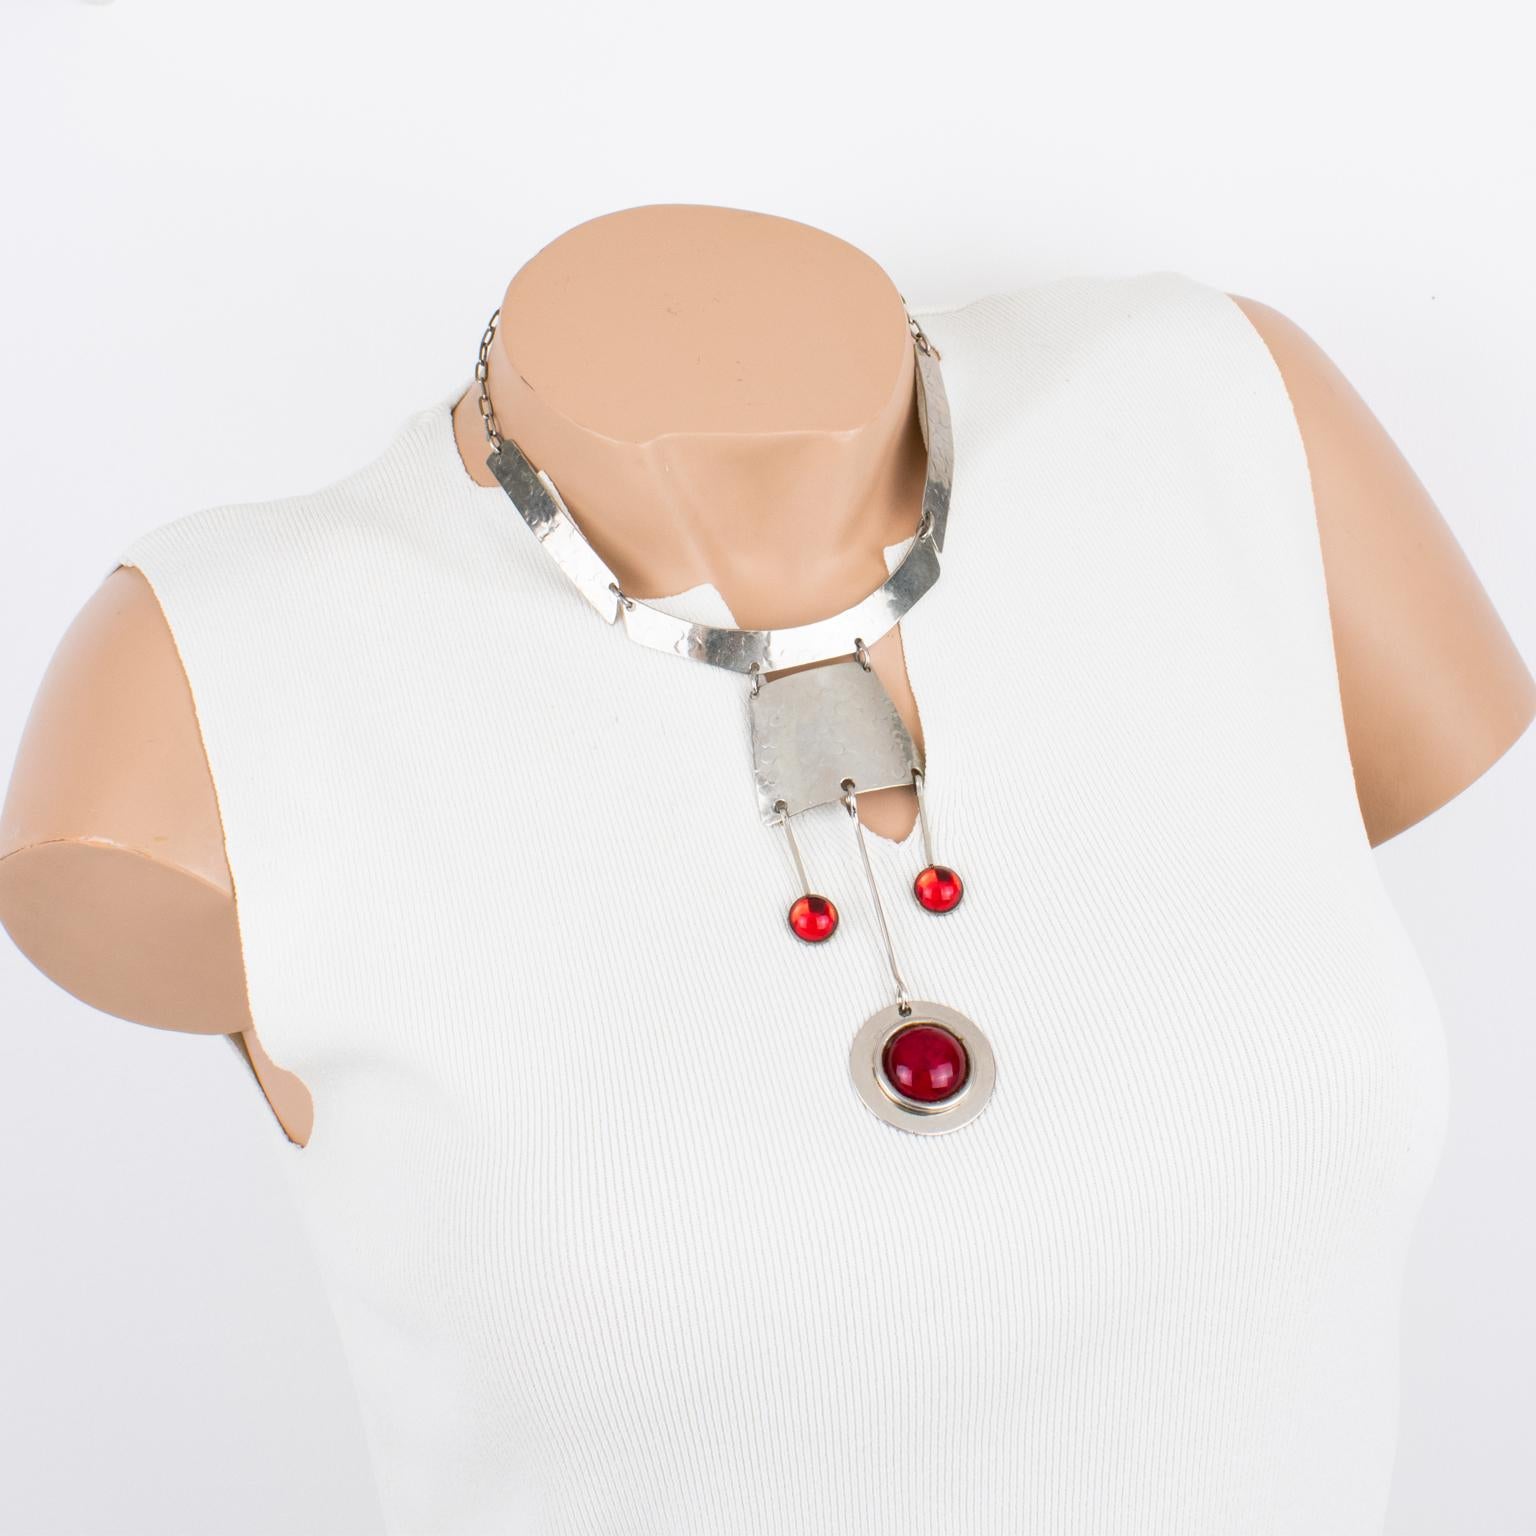 This stunning modernist Space Age necklace was crafted in France in the 1970s. The choker boasts stainless steel hammered geometric elements ornate with dangling charm pendants. The decorative charm pendants are embellished with bright red glass